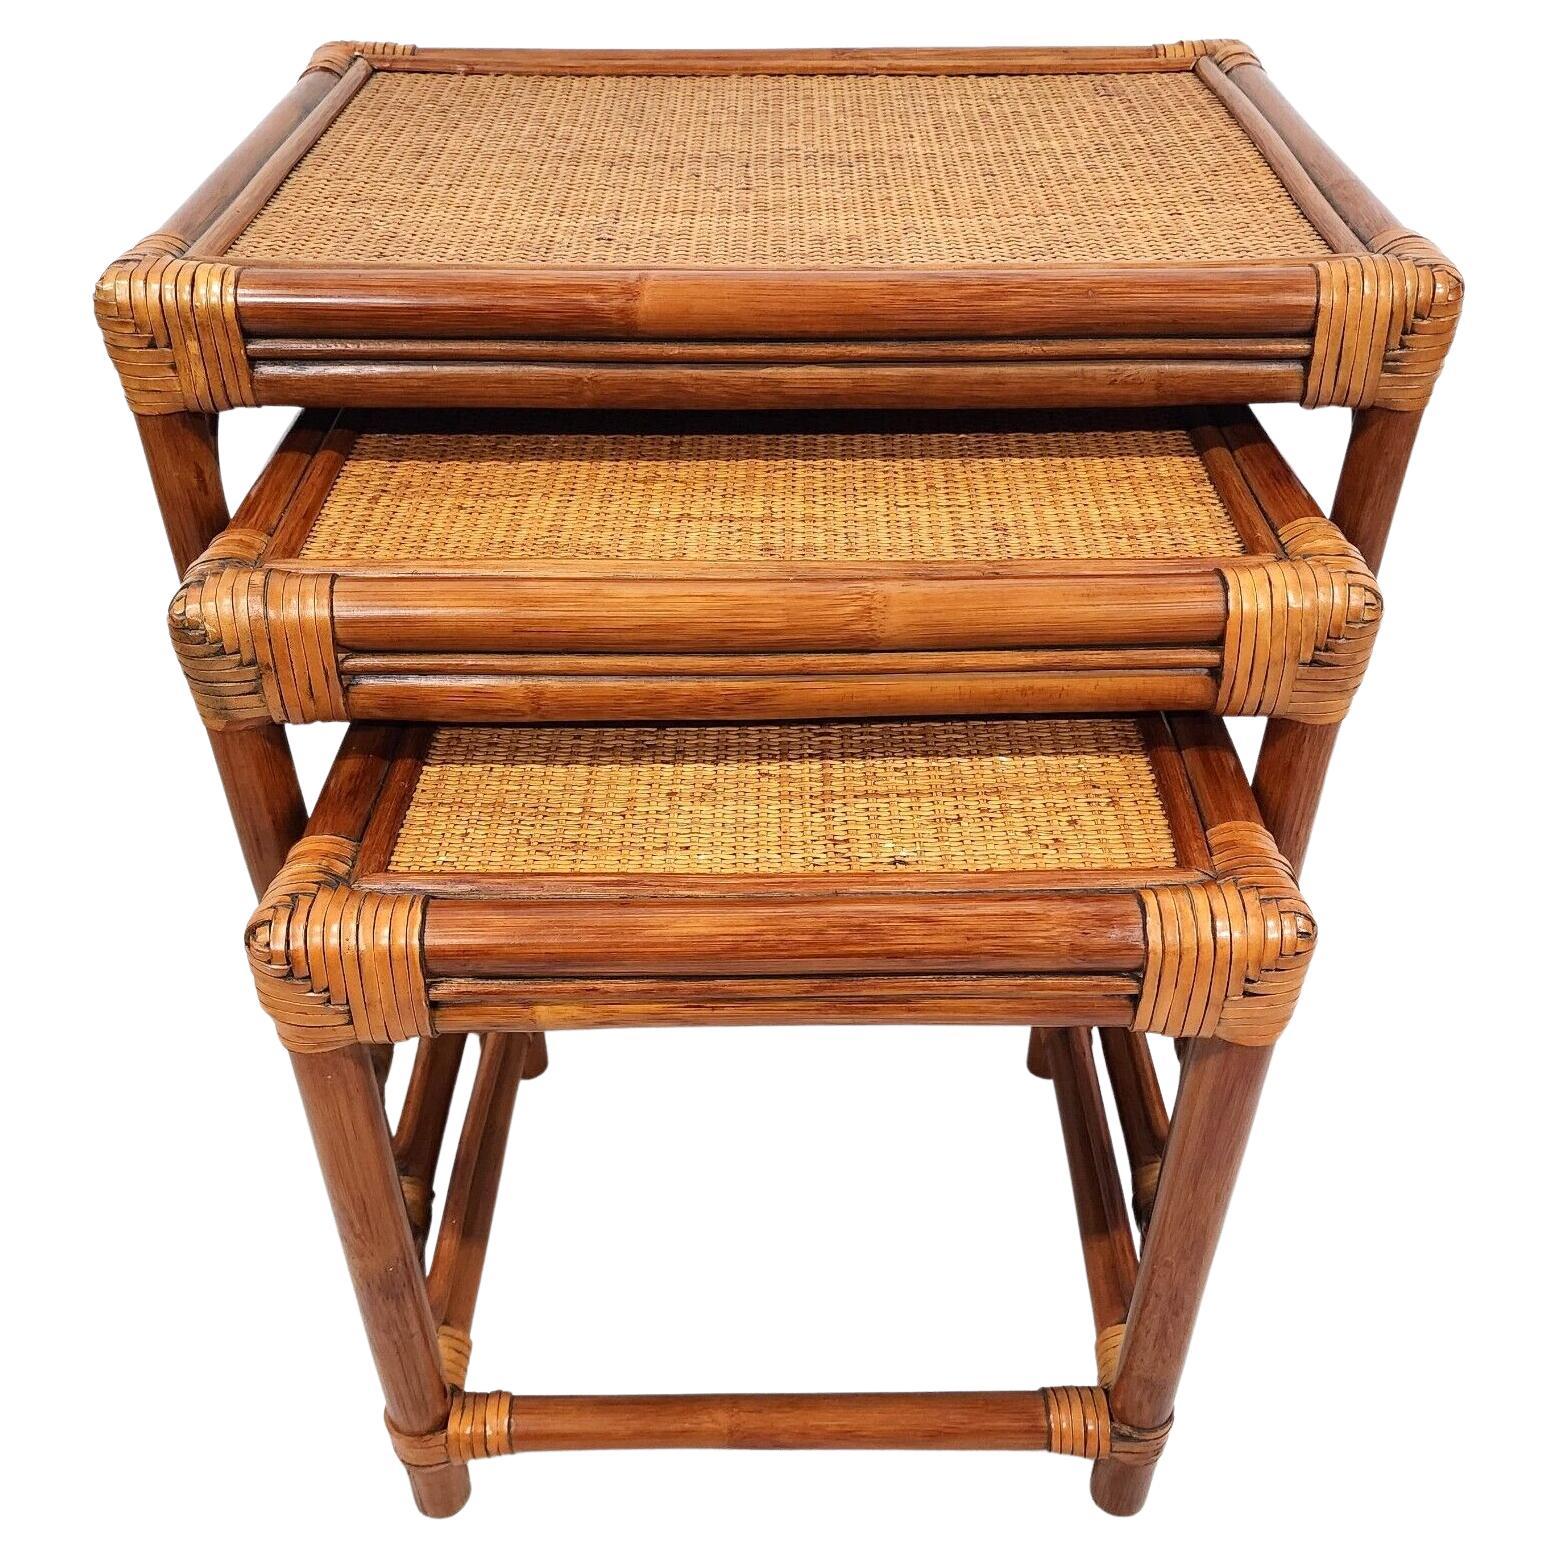 Bamboo Nesting Tables Rattan Wicker Set of 3 For Sale